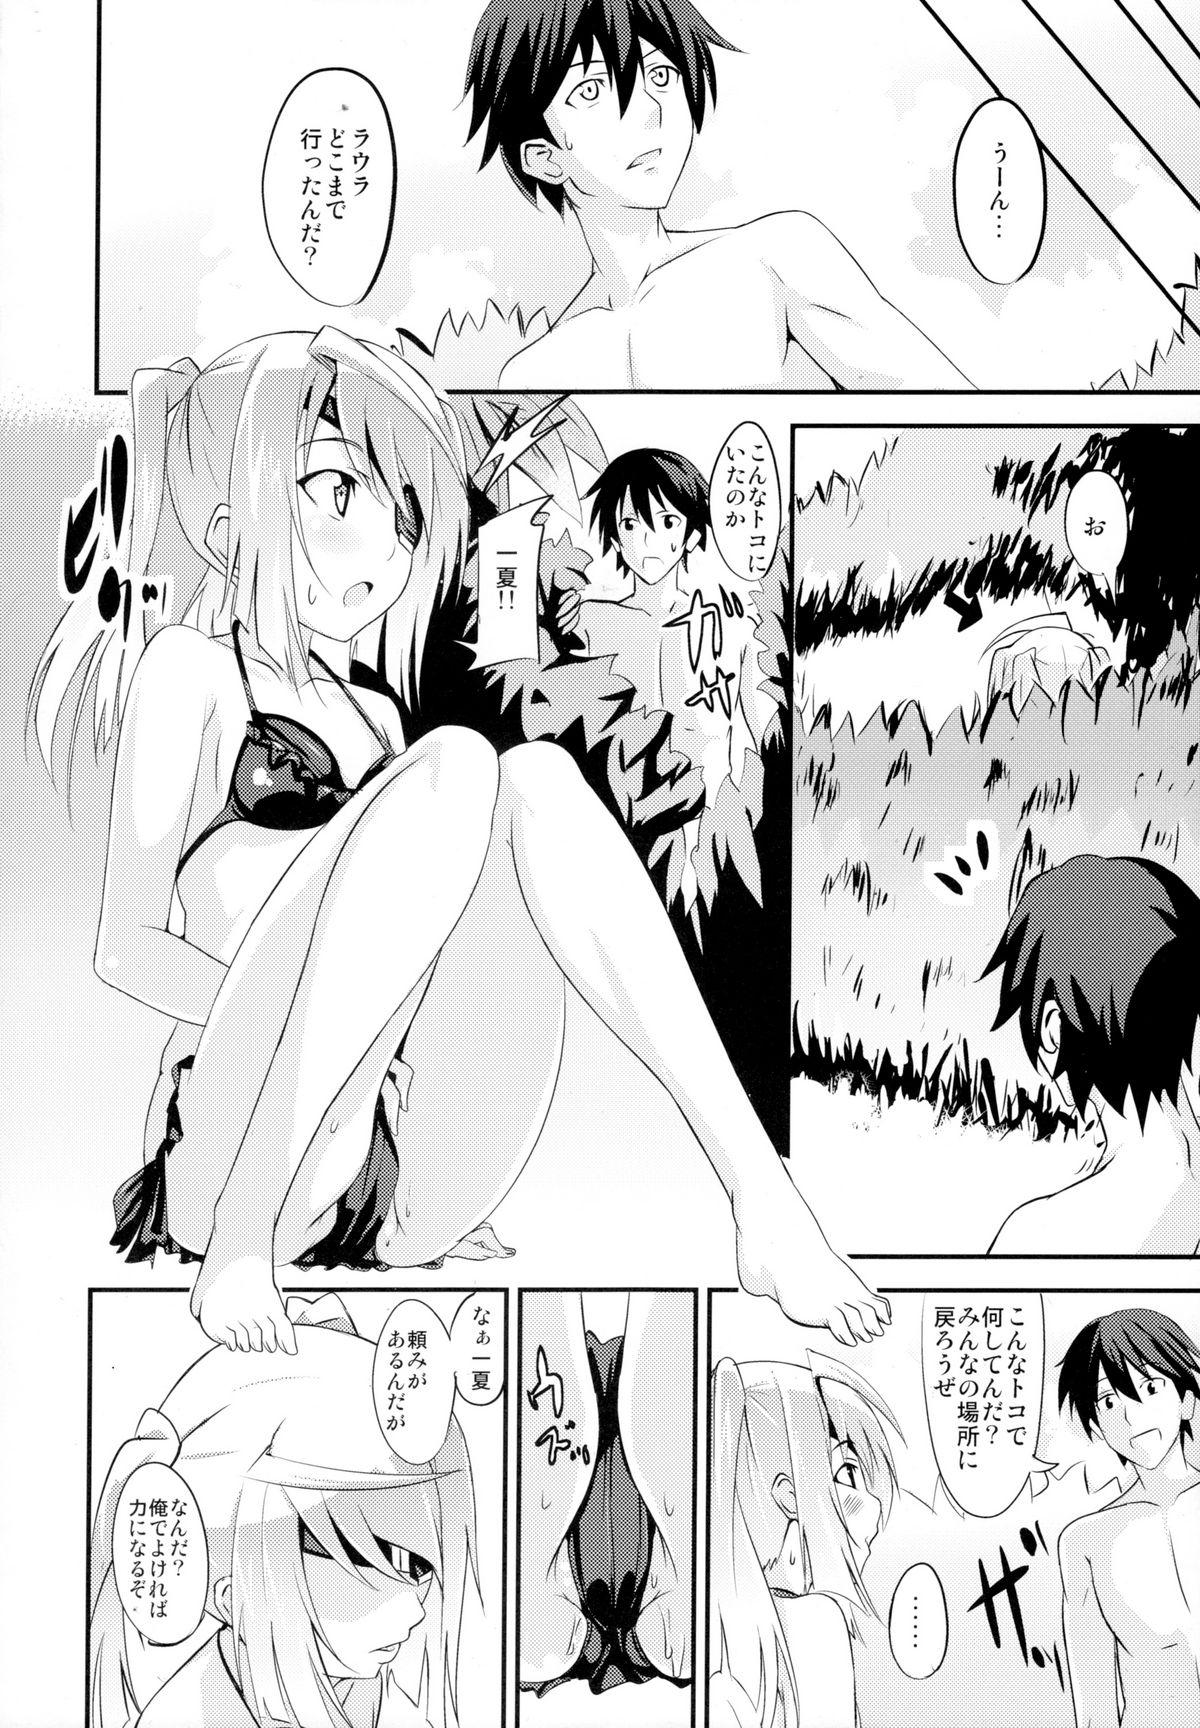 Couch SODA! - Infinite stratos Porn Star - Page 5